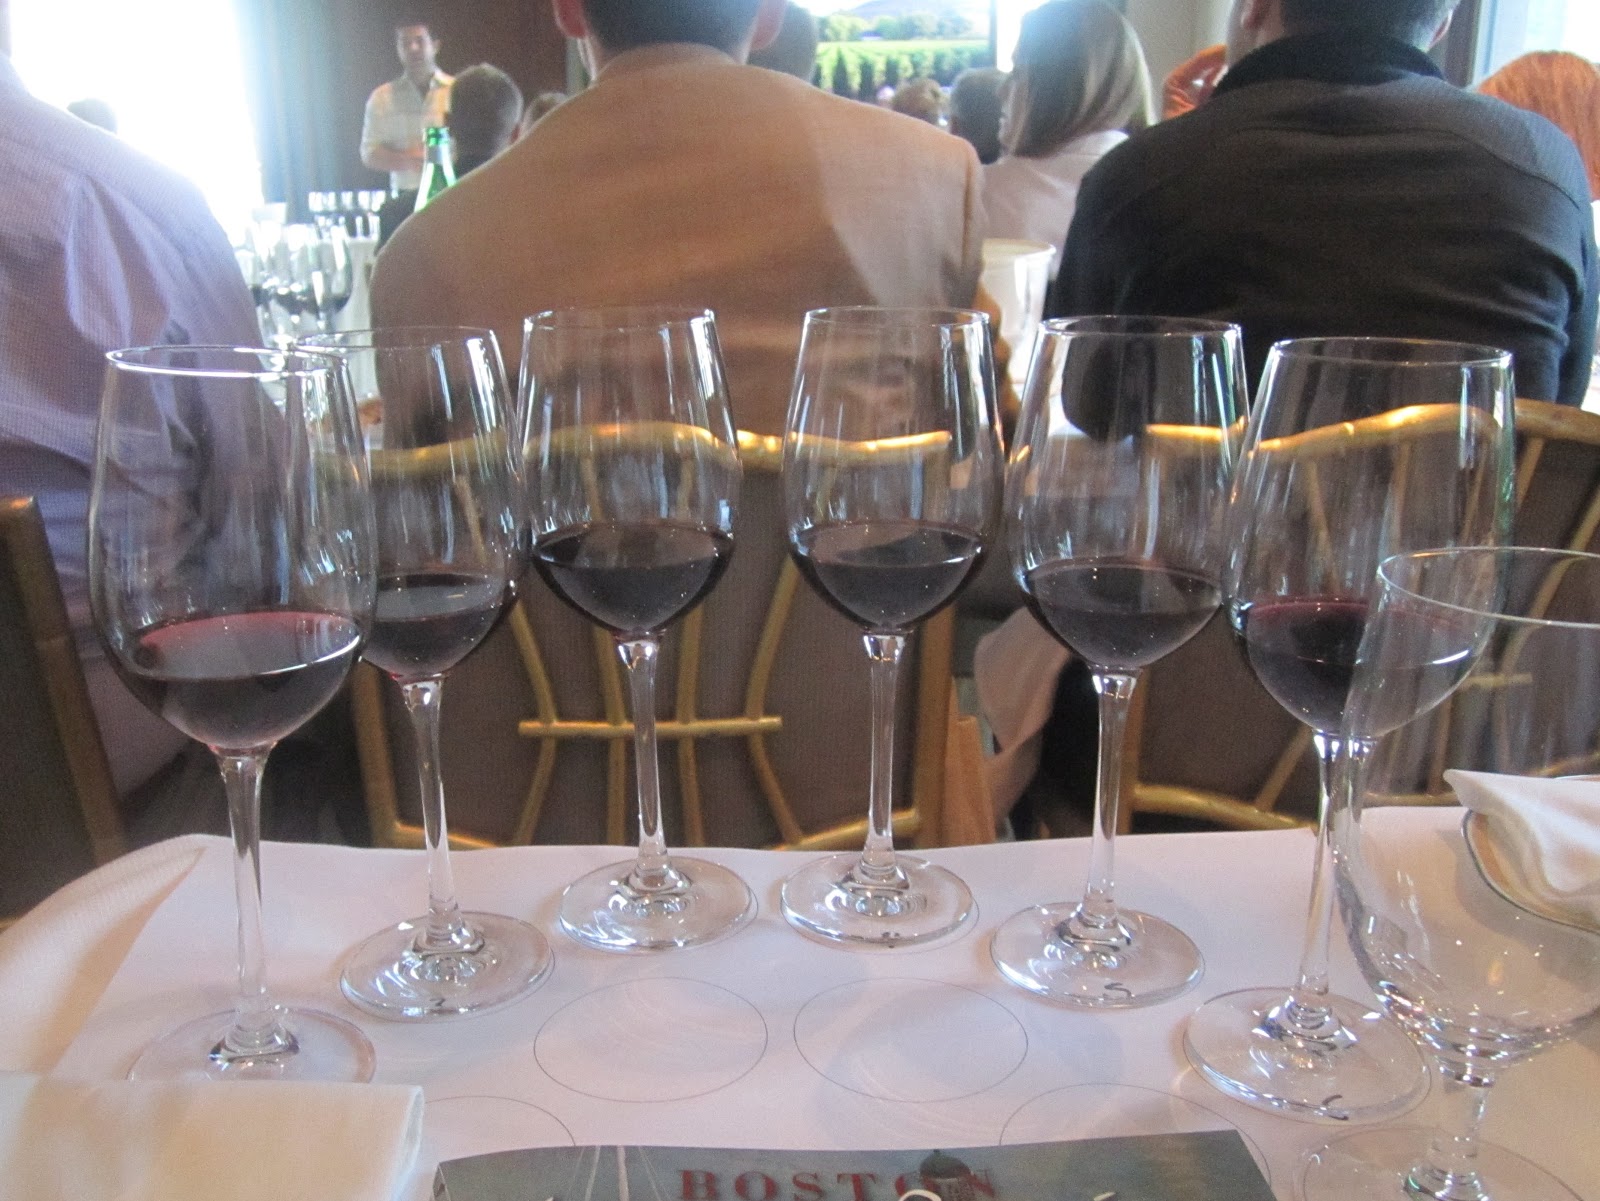 Everything You Need to Know for Enjoying a Flight of Wine - WWP